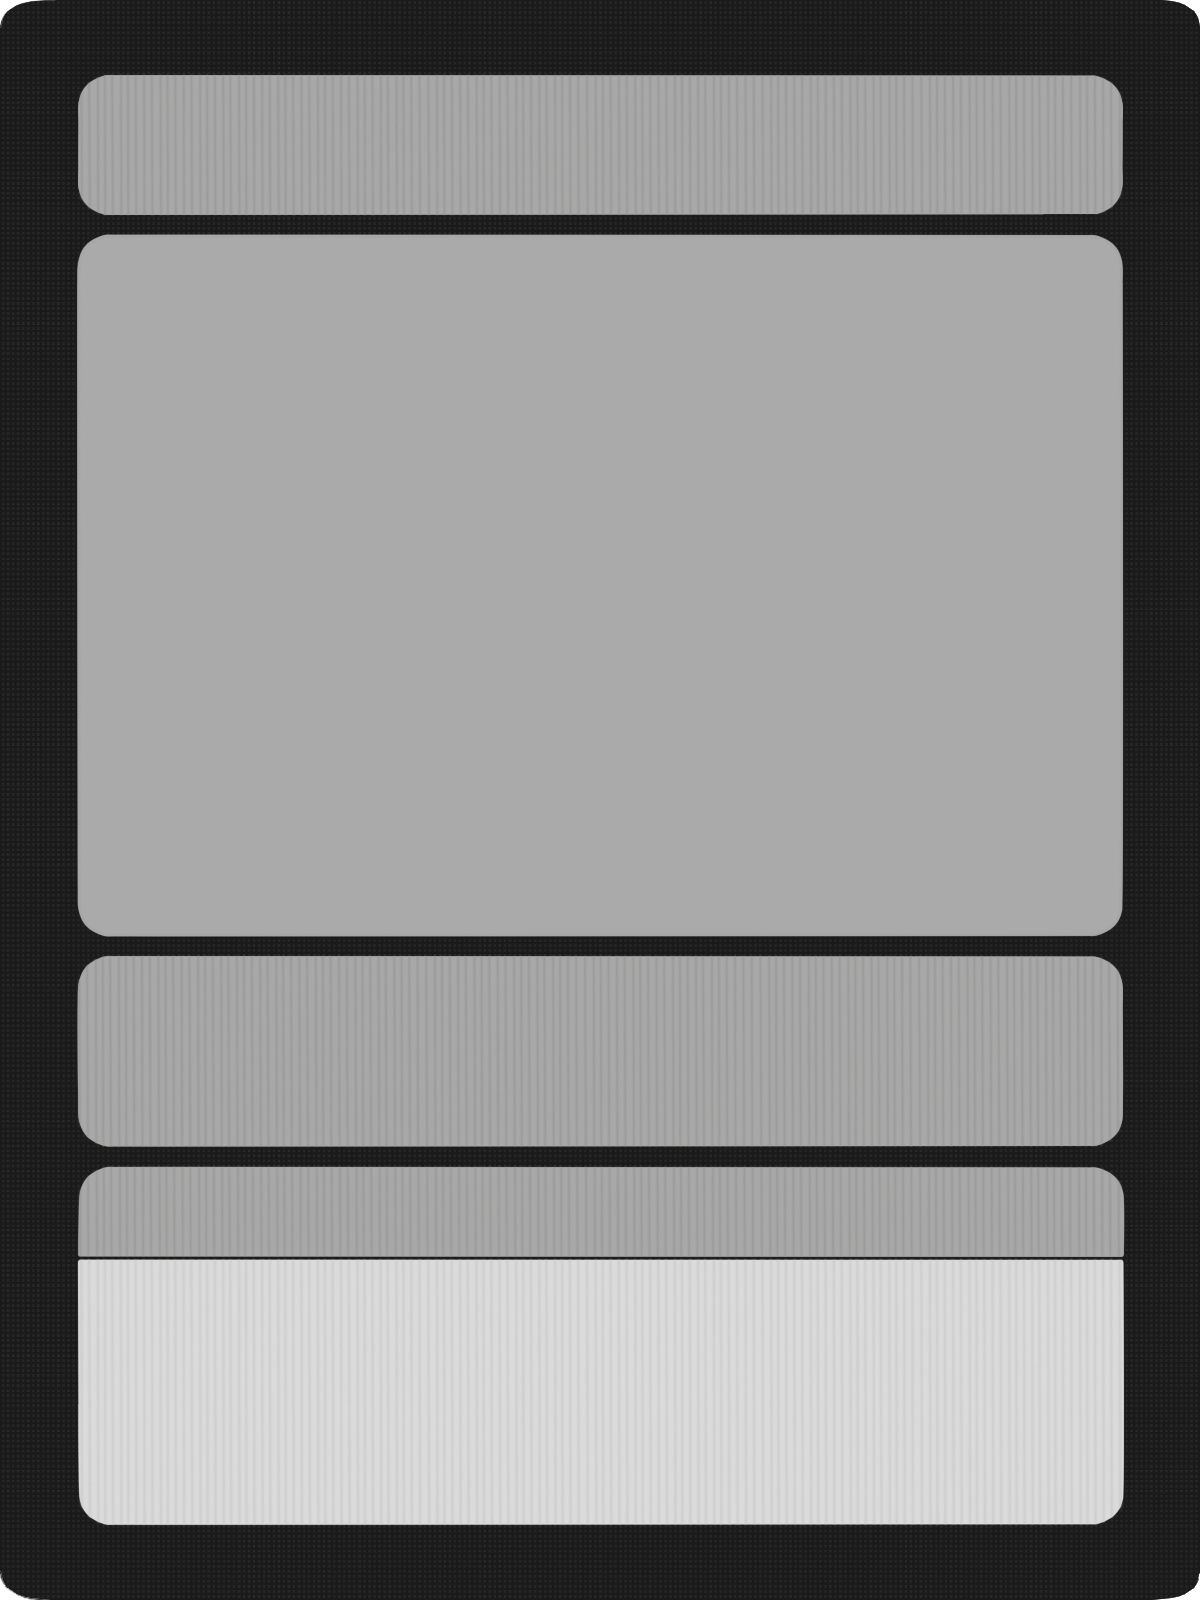 This Is A Free To Use Template For Those Wishing Pertaining To Blank Magic Card Template